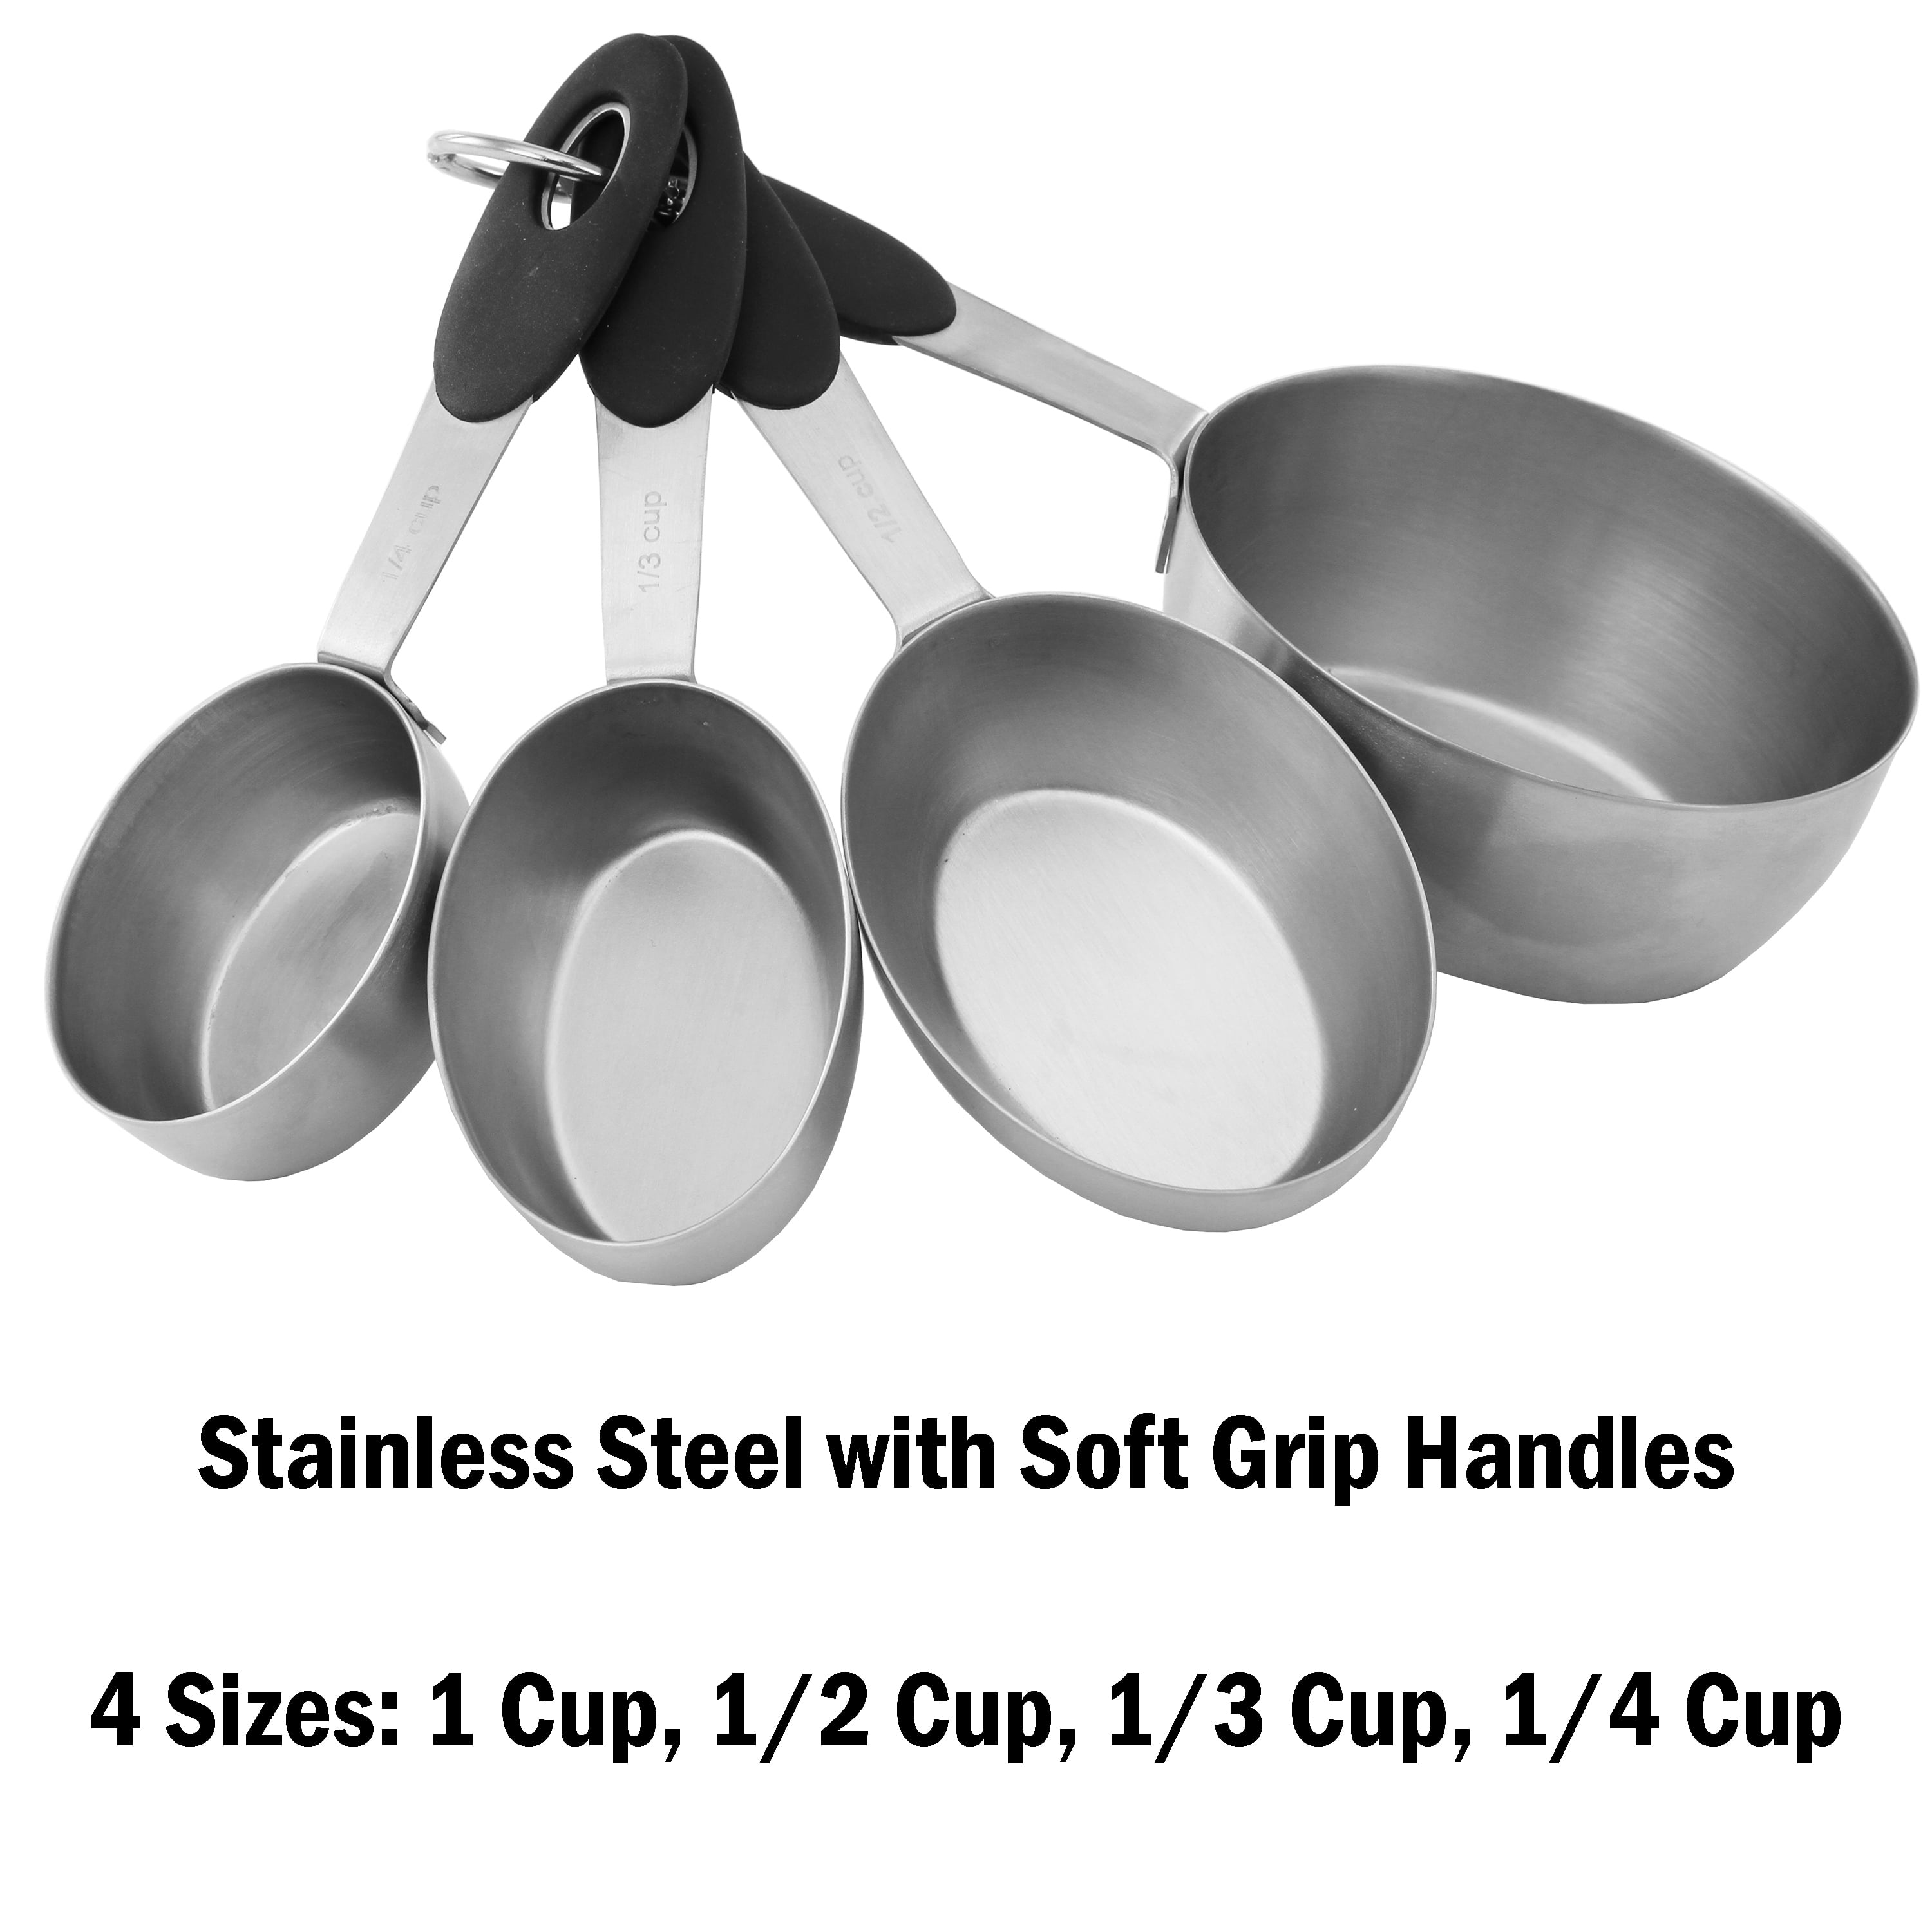 Stainless Steel Measuring Cups and Spoons Set & Everyday Kitchen Tool Set (15 Pc) Bundle